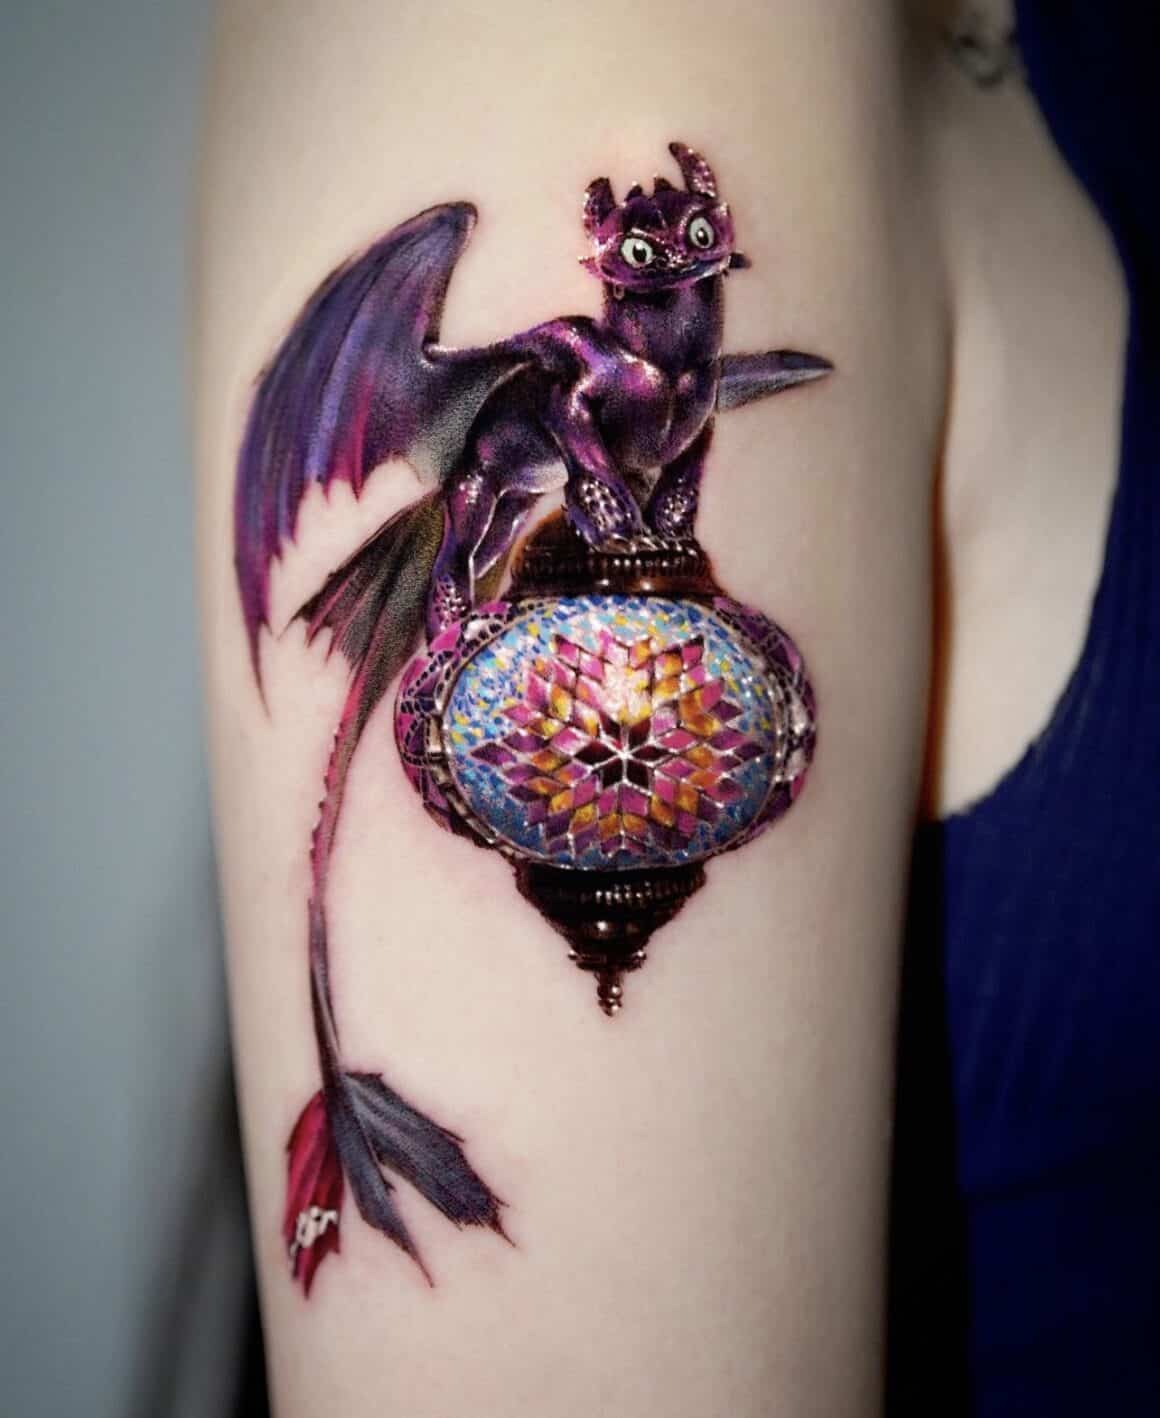 11 Small Dragon Tattoo Ideas That Will Blow Your Mind  alexie